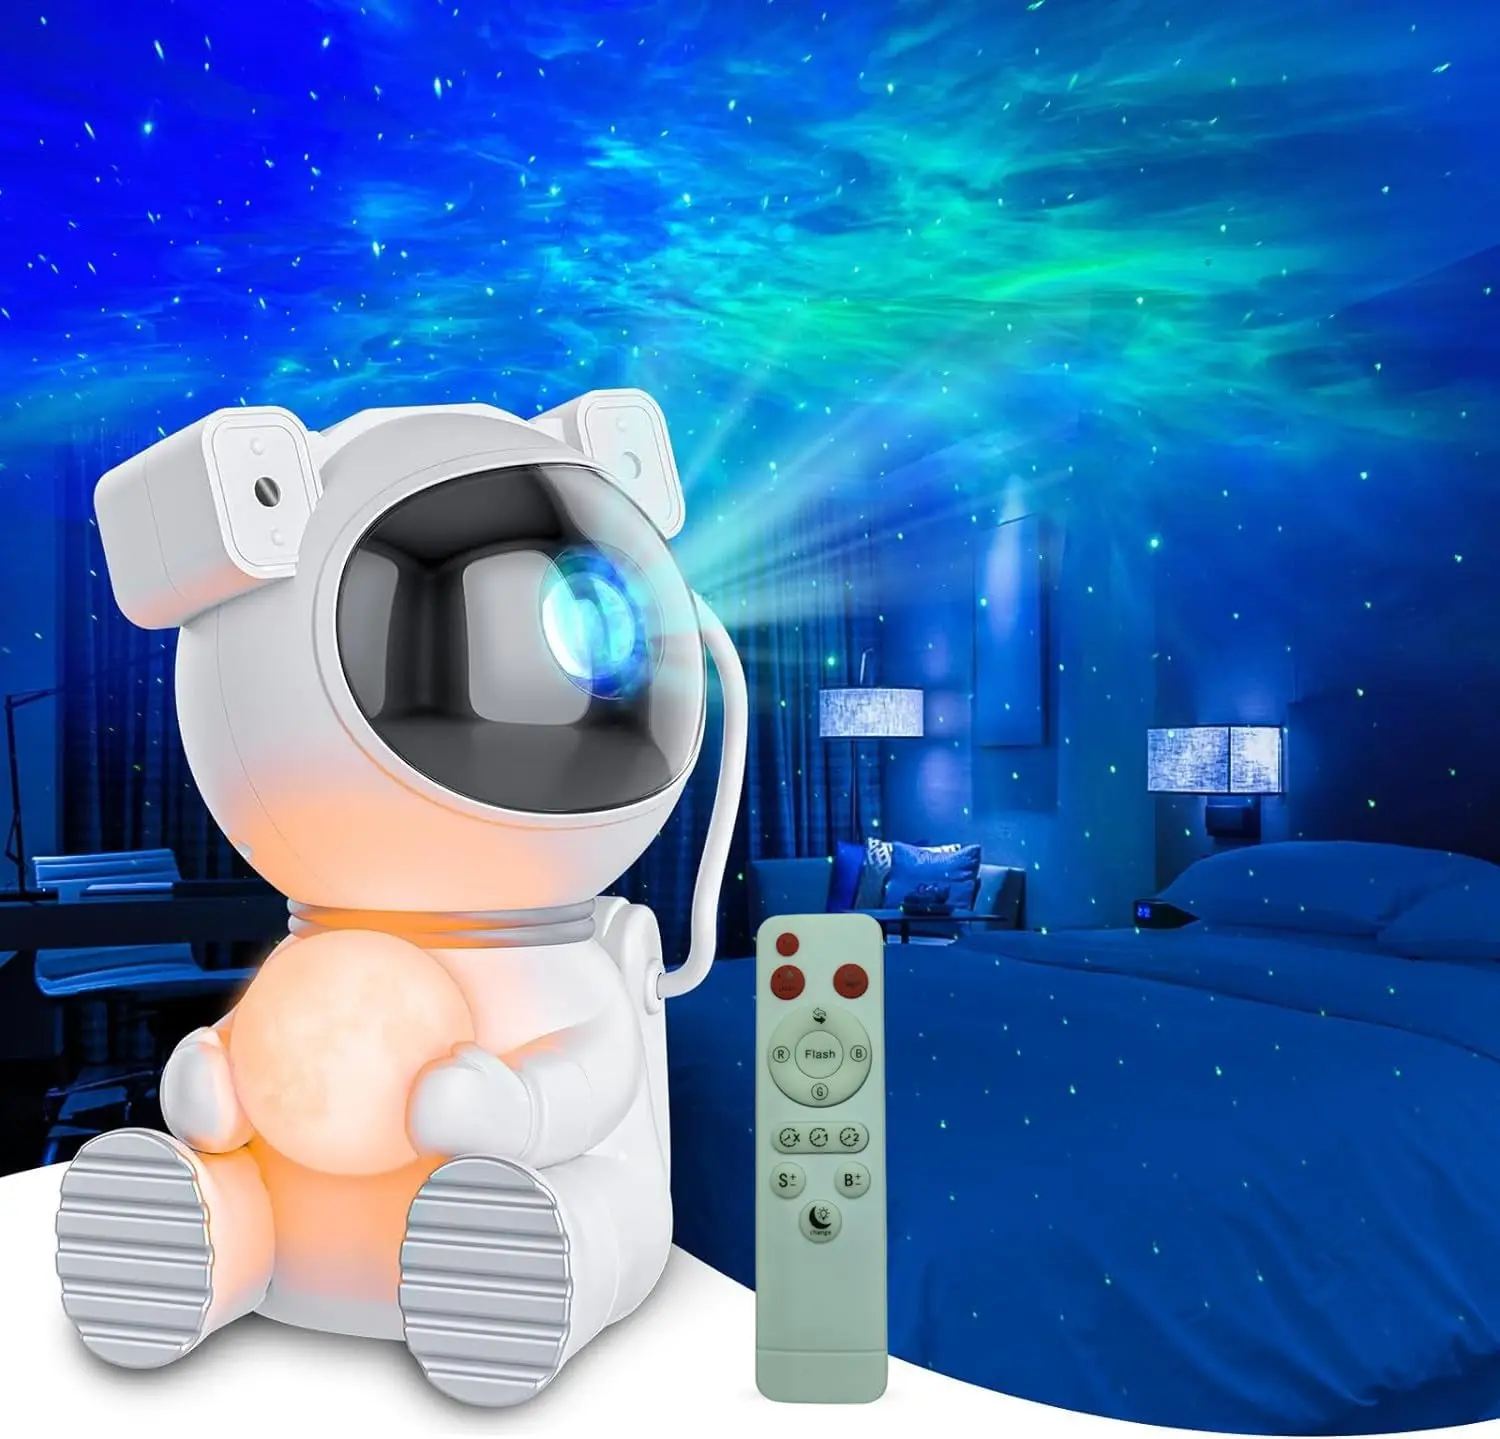 

Astronaut Space Projector Night Light Galaxy Starry Nebula Ceiling Projection LED Lamp with Timer Room Decor, Party, Kids Gift